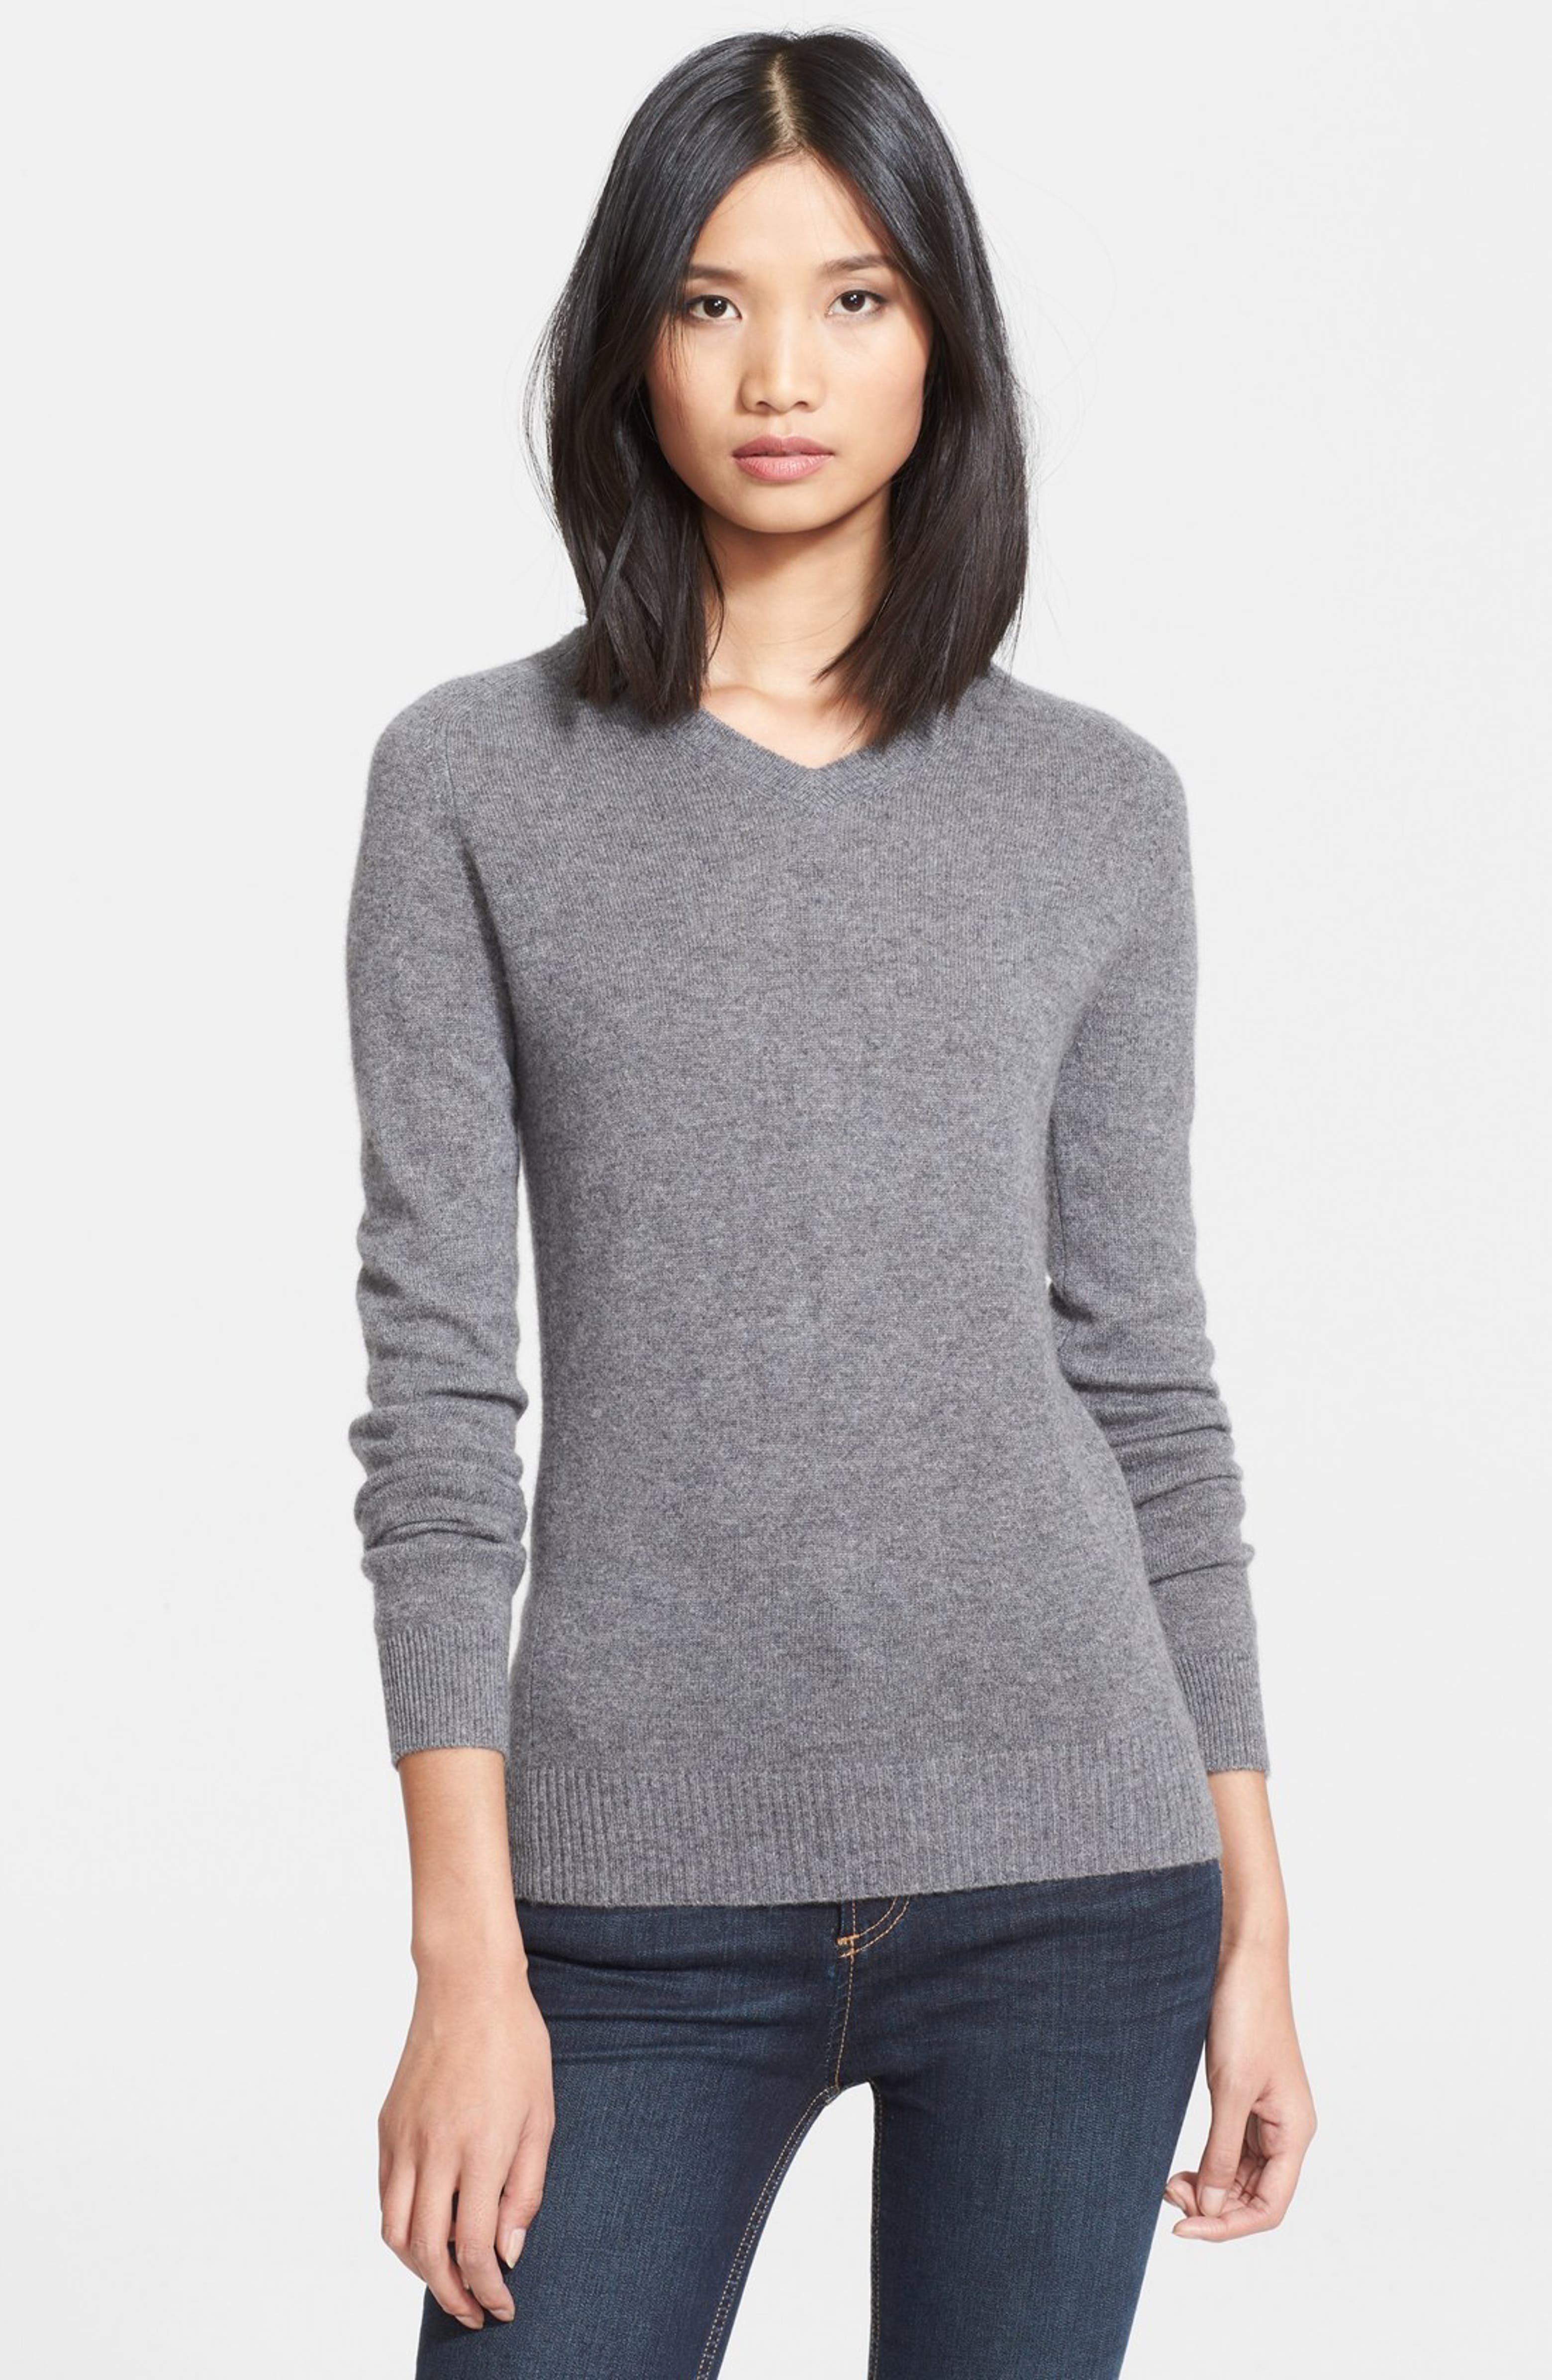 MARC BY MARC JACOBS 'Jo' Cashmere Sweater | Nordstrom